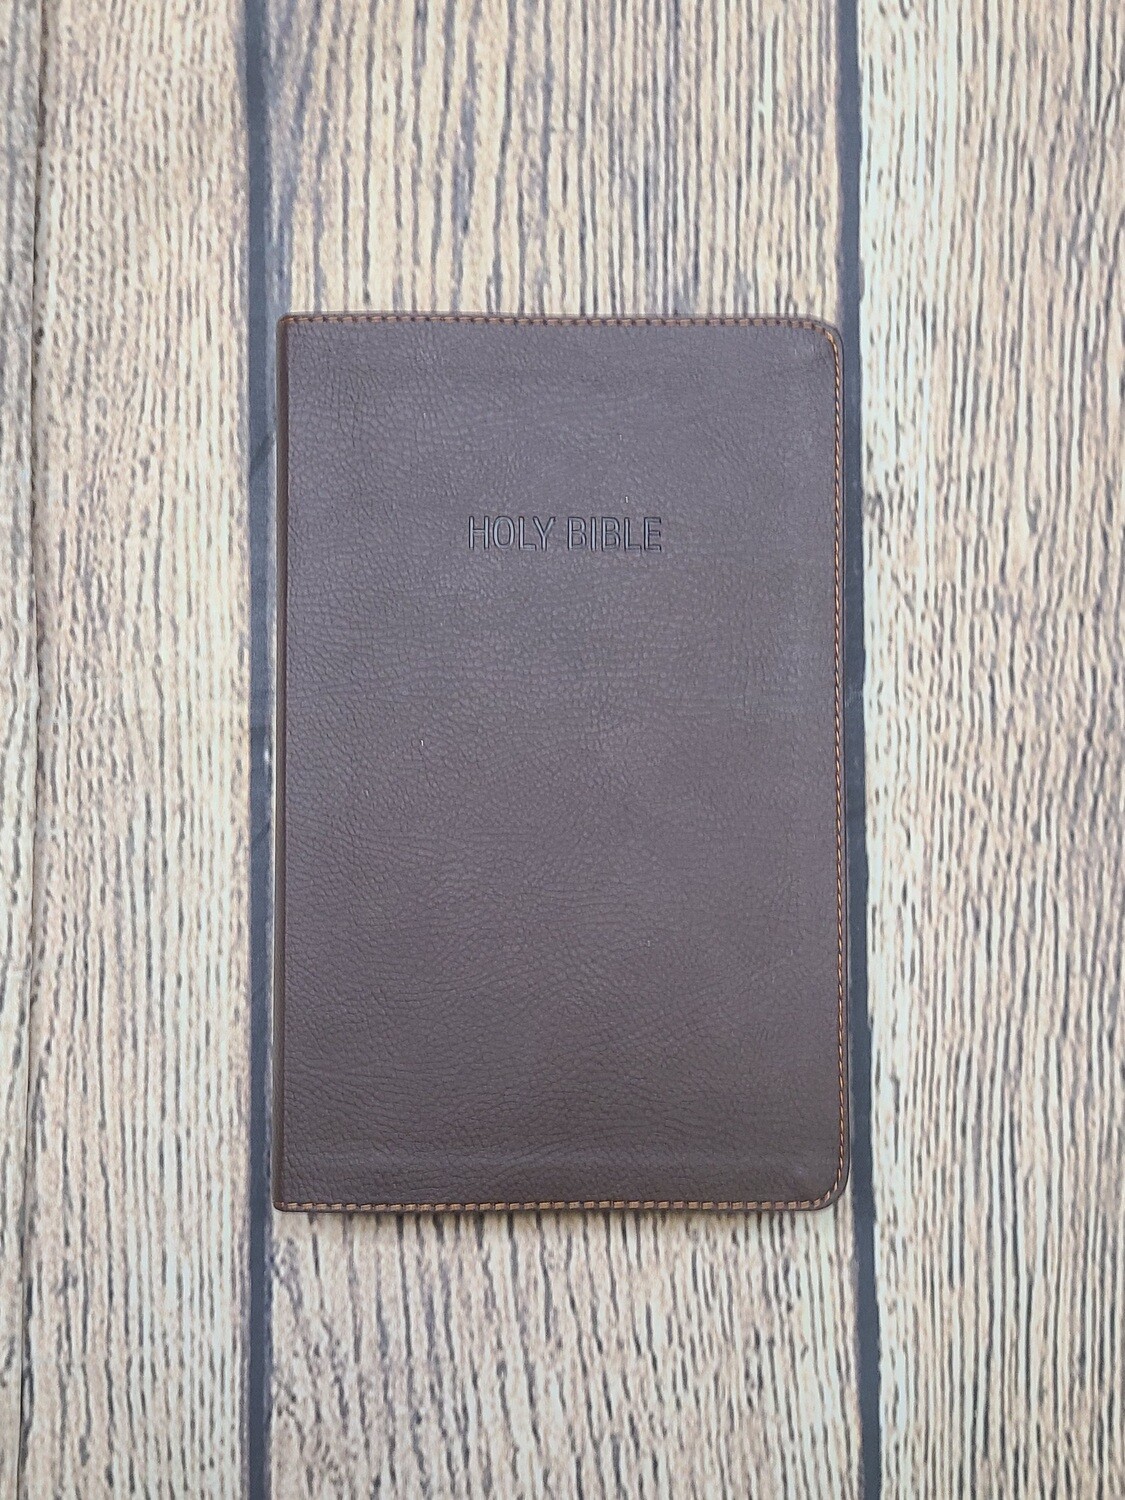 NKJV Foundation Study Bible - Earth Brown Leathersoft